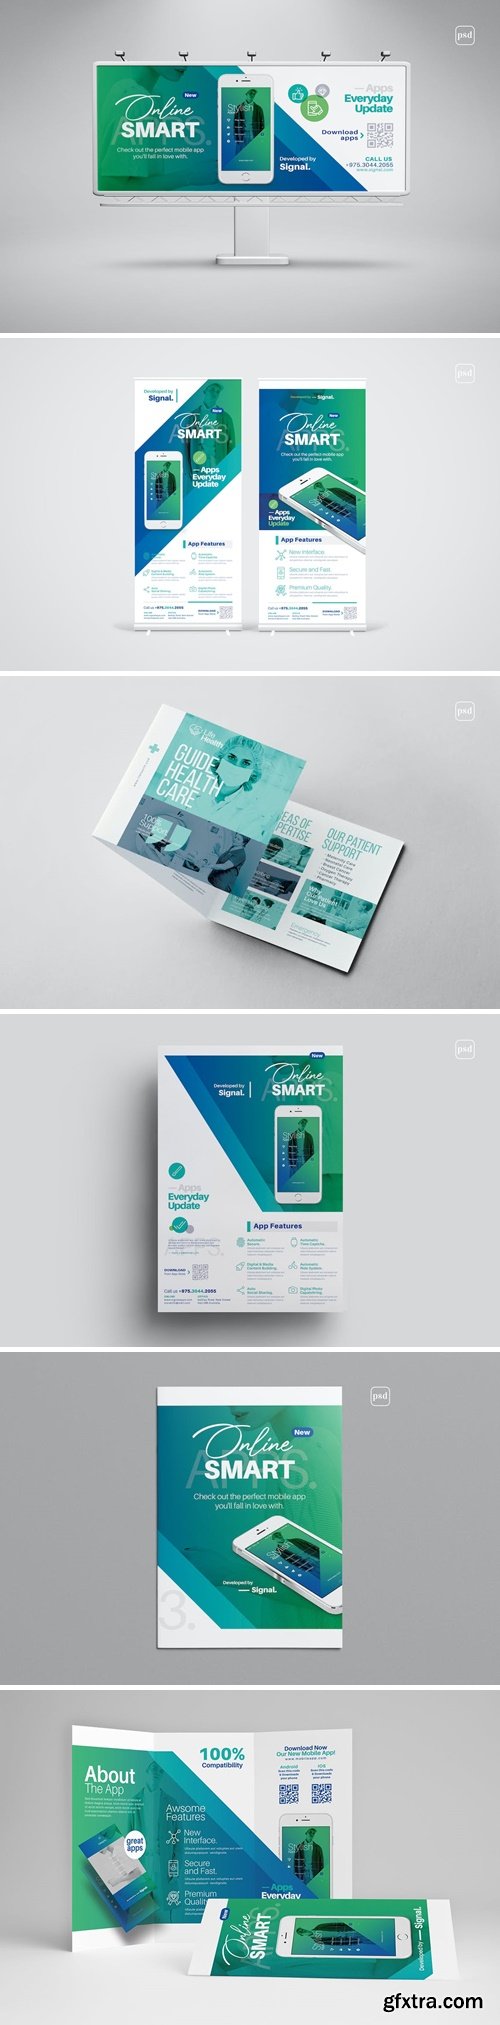 Mobile Apps Graphic Pack Template